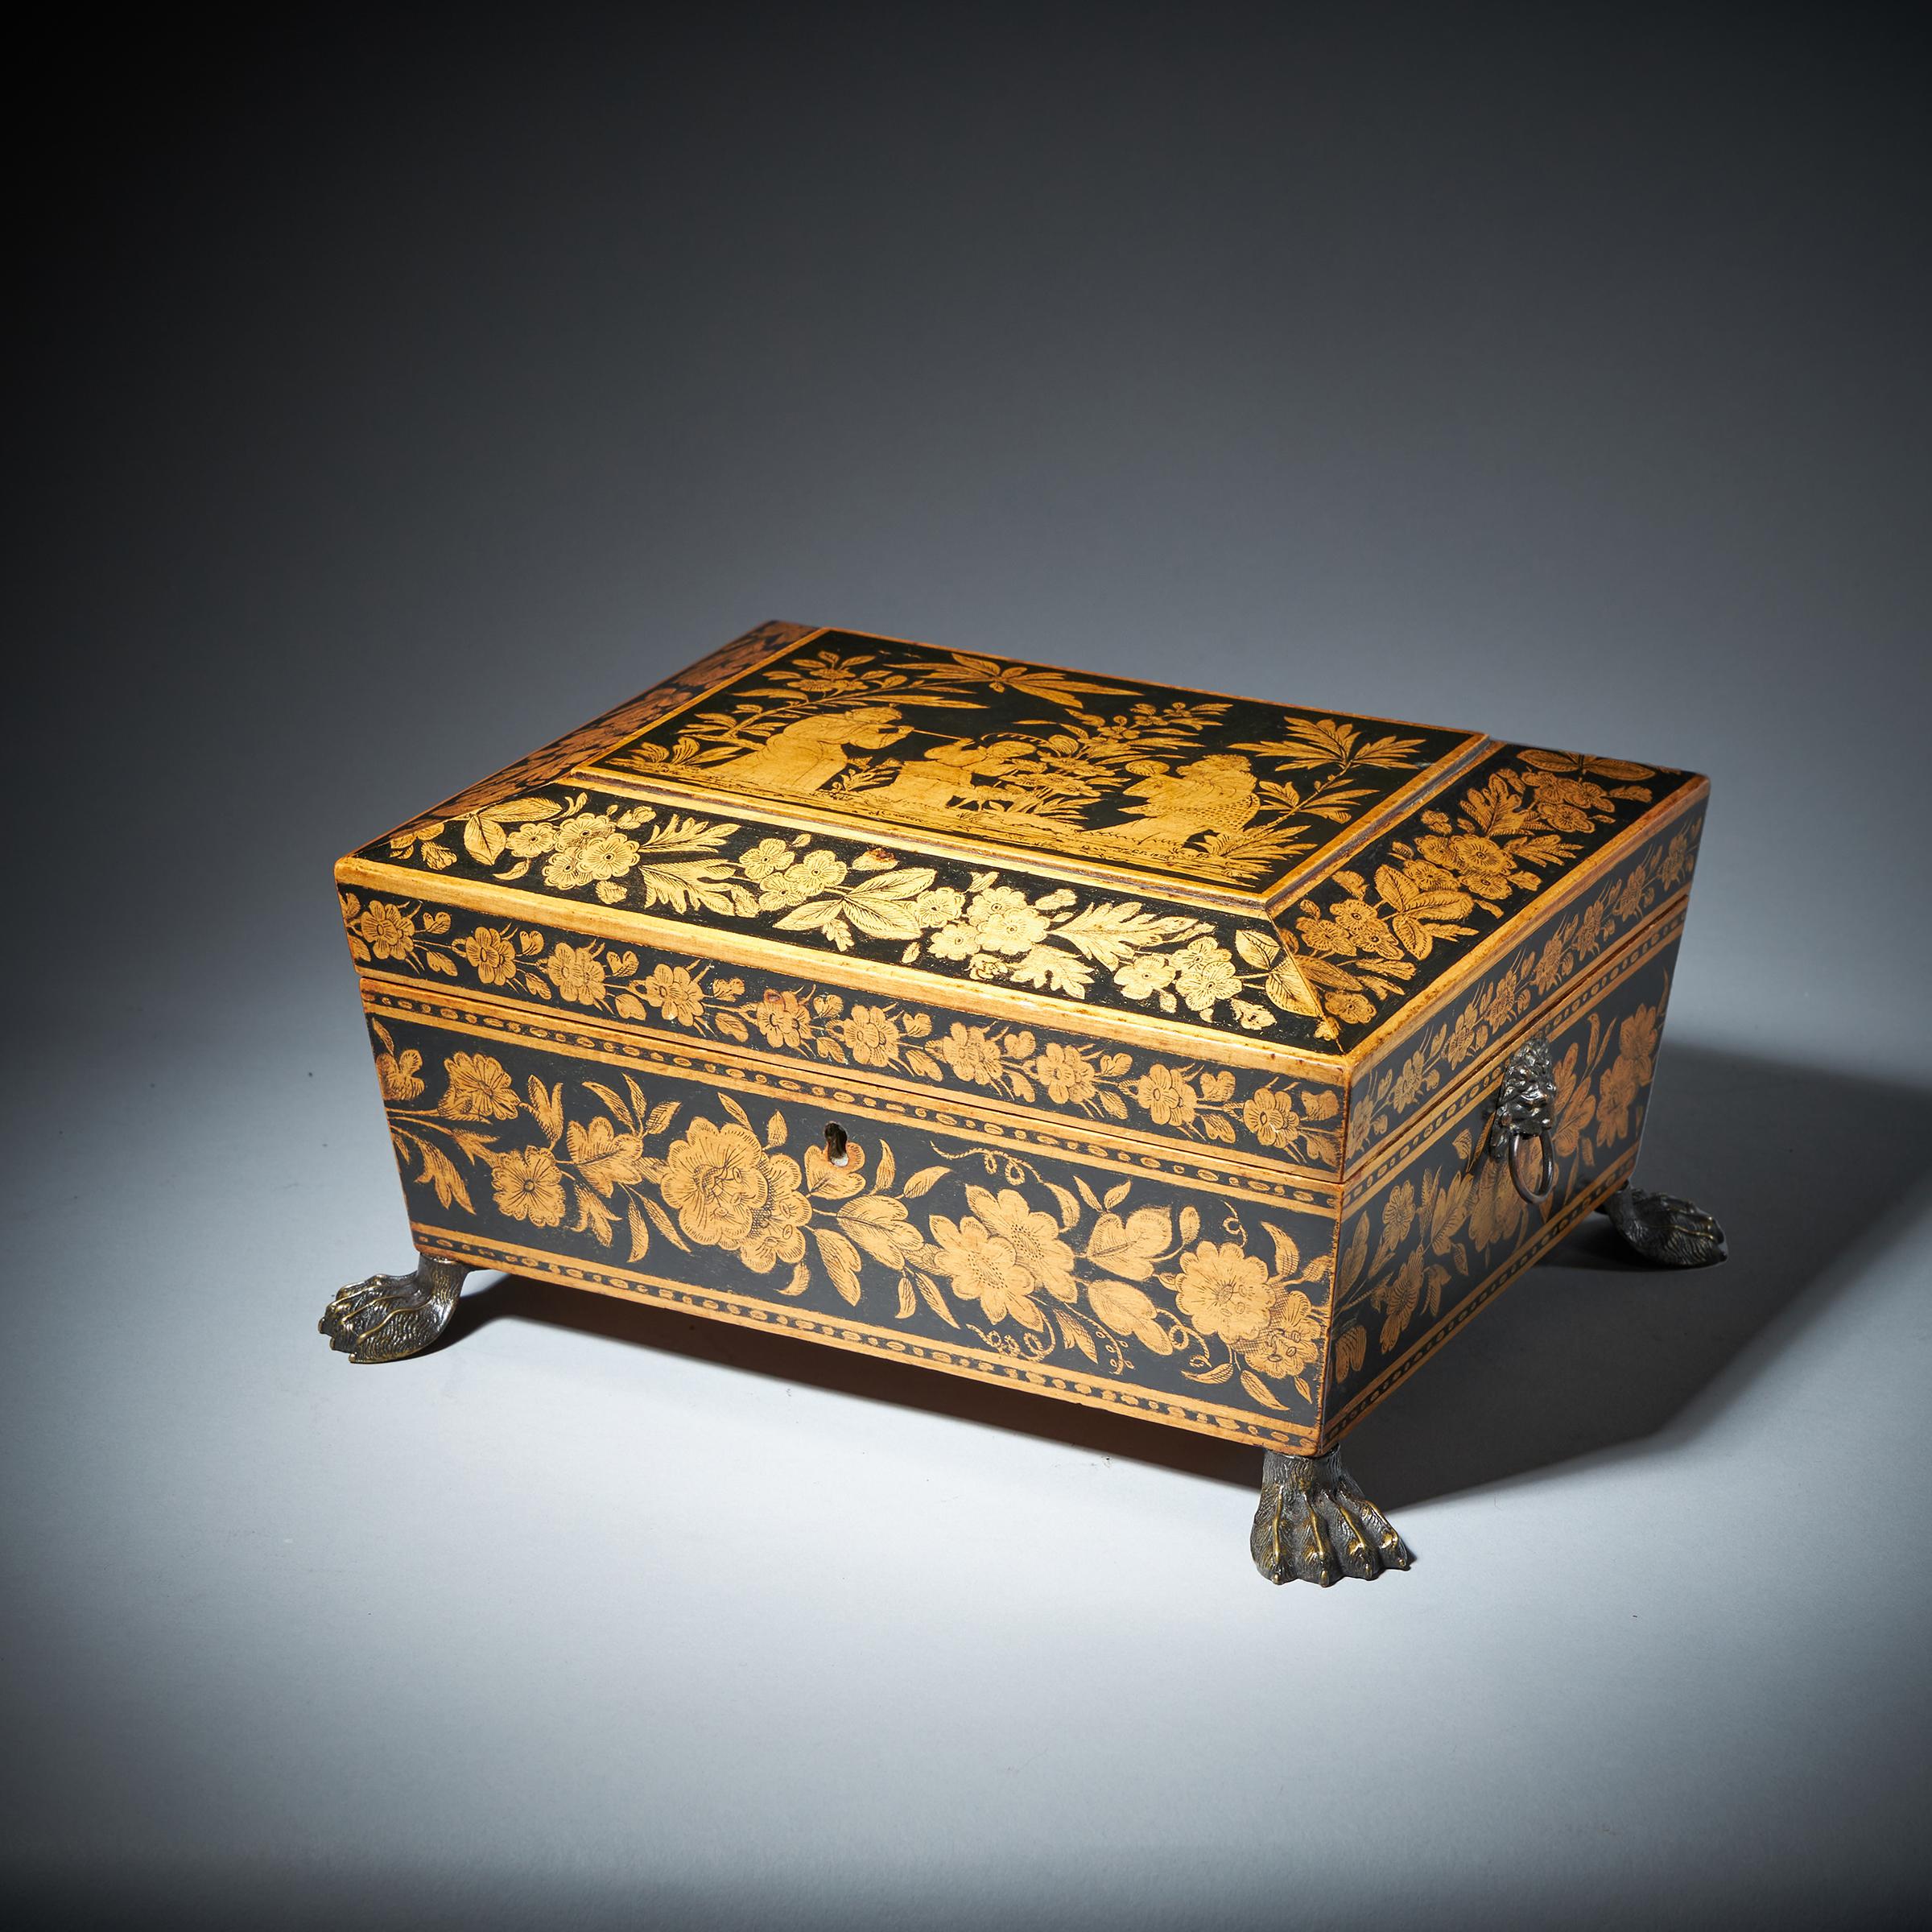 An exemplary George III chinoiserie and floral design penwork jewellery box, dated 1816. 

This superb example in flawless condition is incredibly well decorated onto sycamore, depicting a floral frieze bordered by linear stringing, raised on hairy